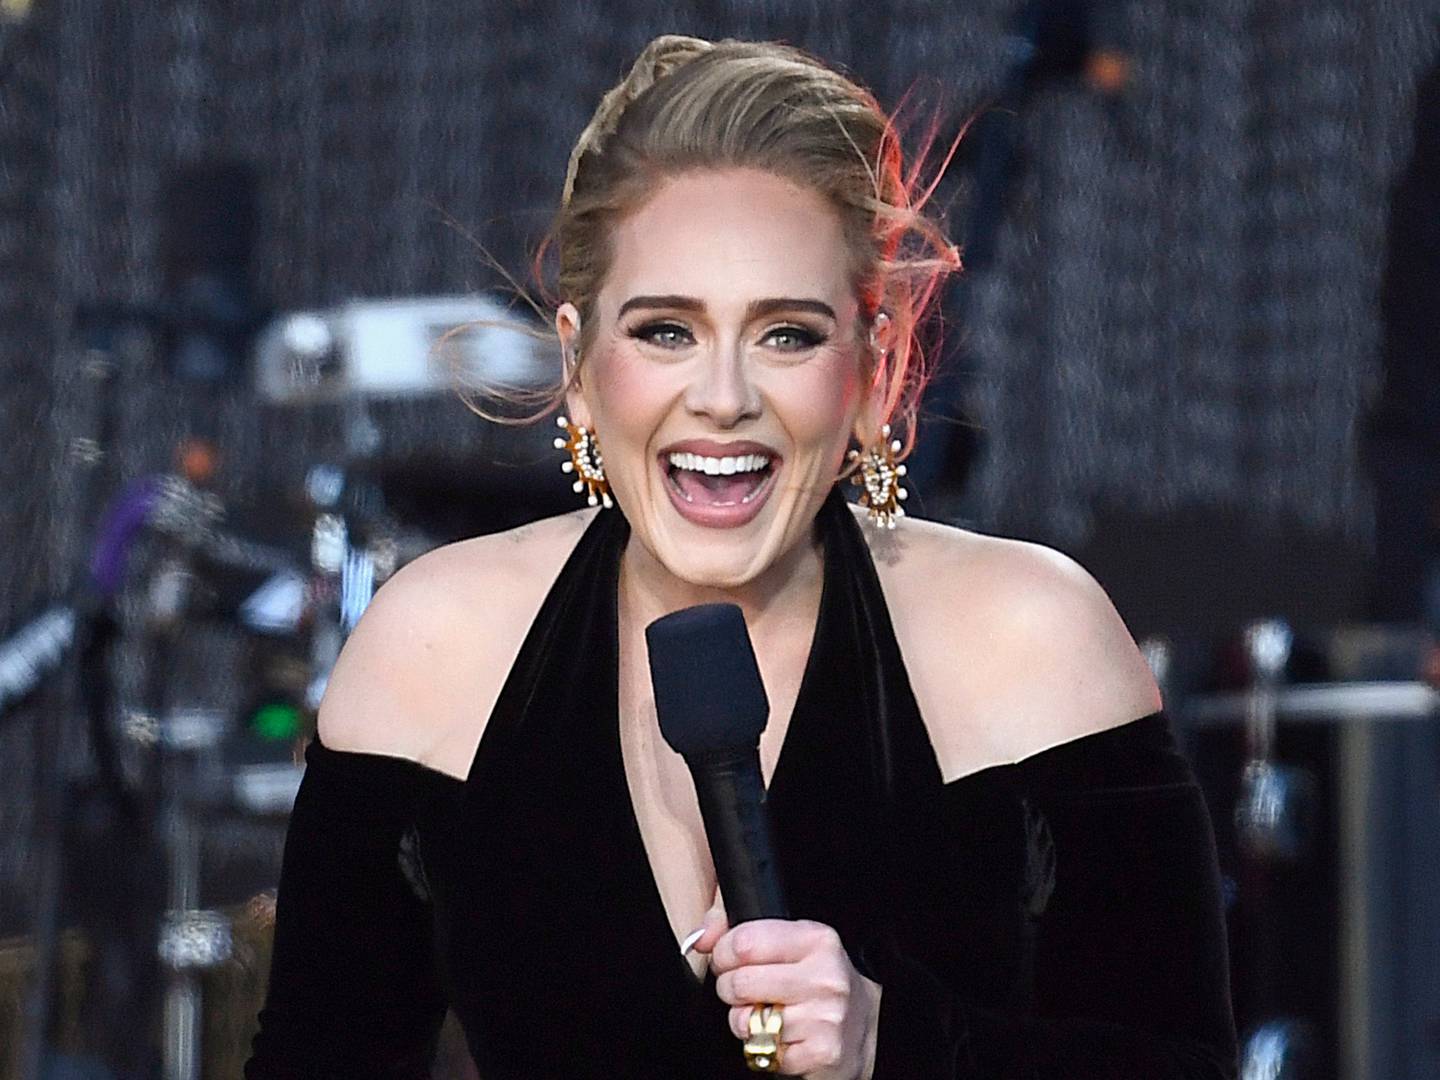 Adele's recent Emmy award nomination offers her a chance to edge closer to the coveted EGOT status. Getty Images 